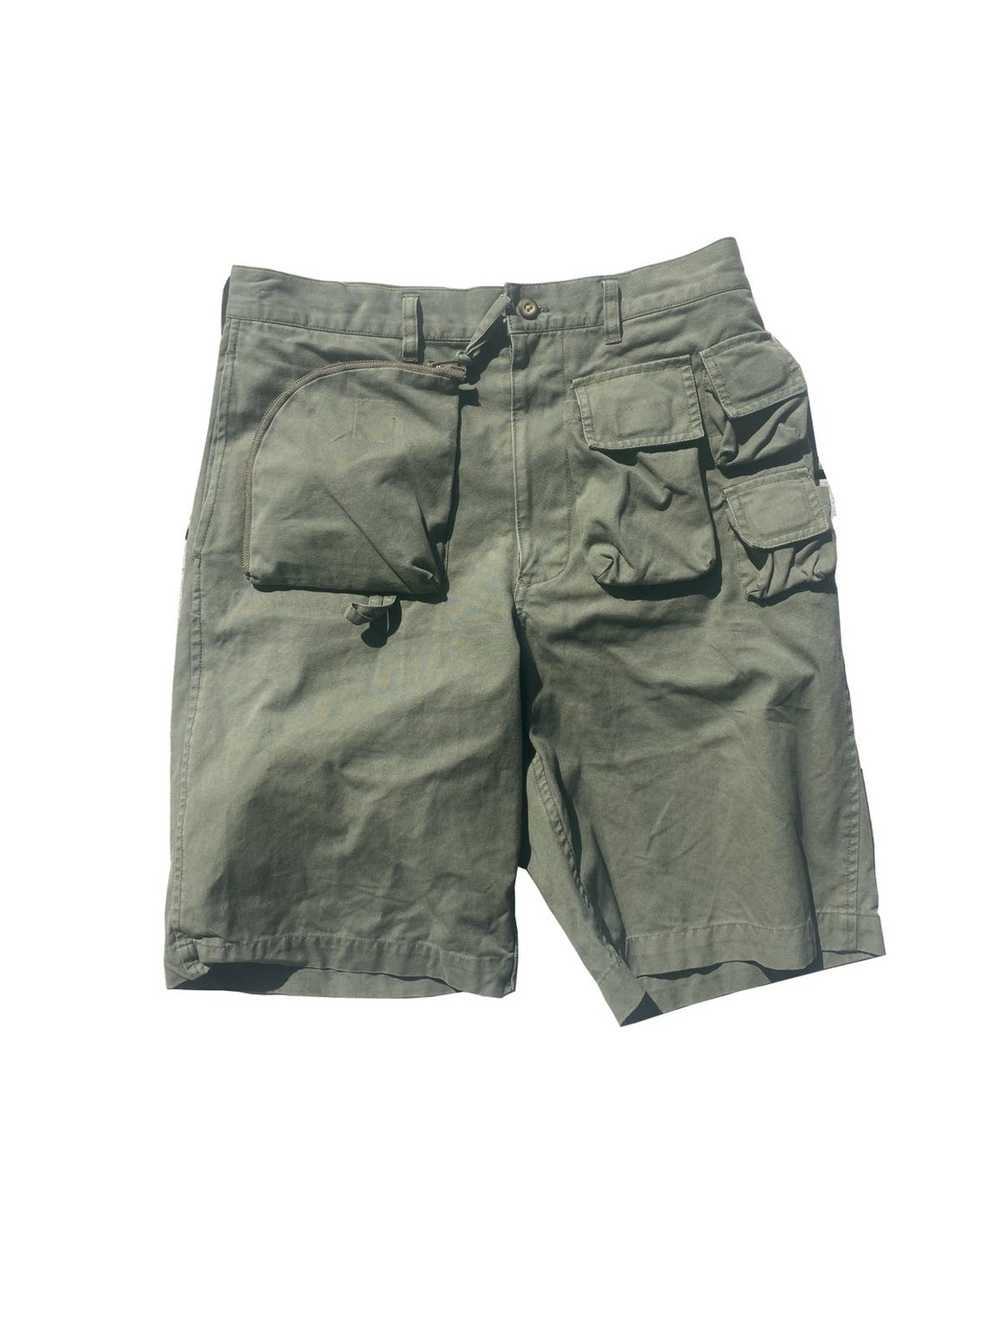 Vintage General/Mountain Research Shorts - image 1